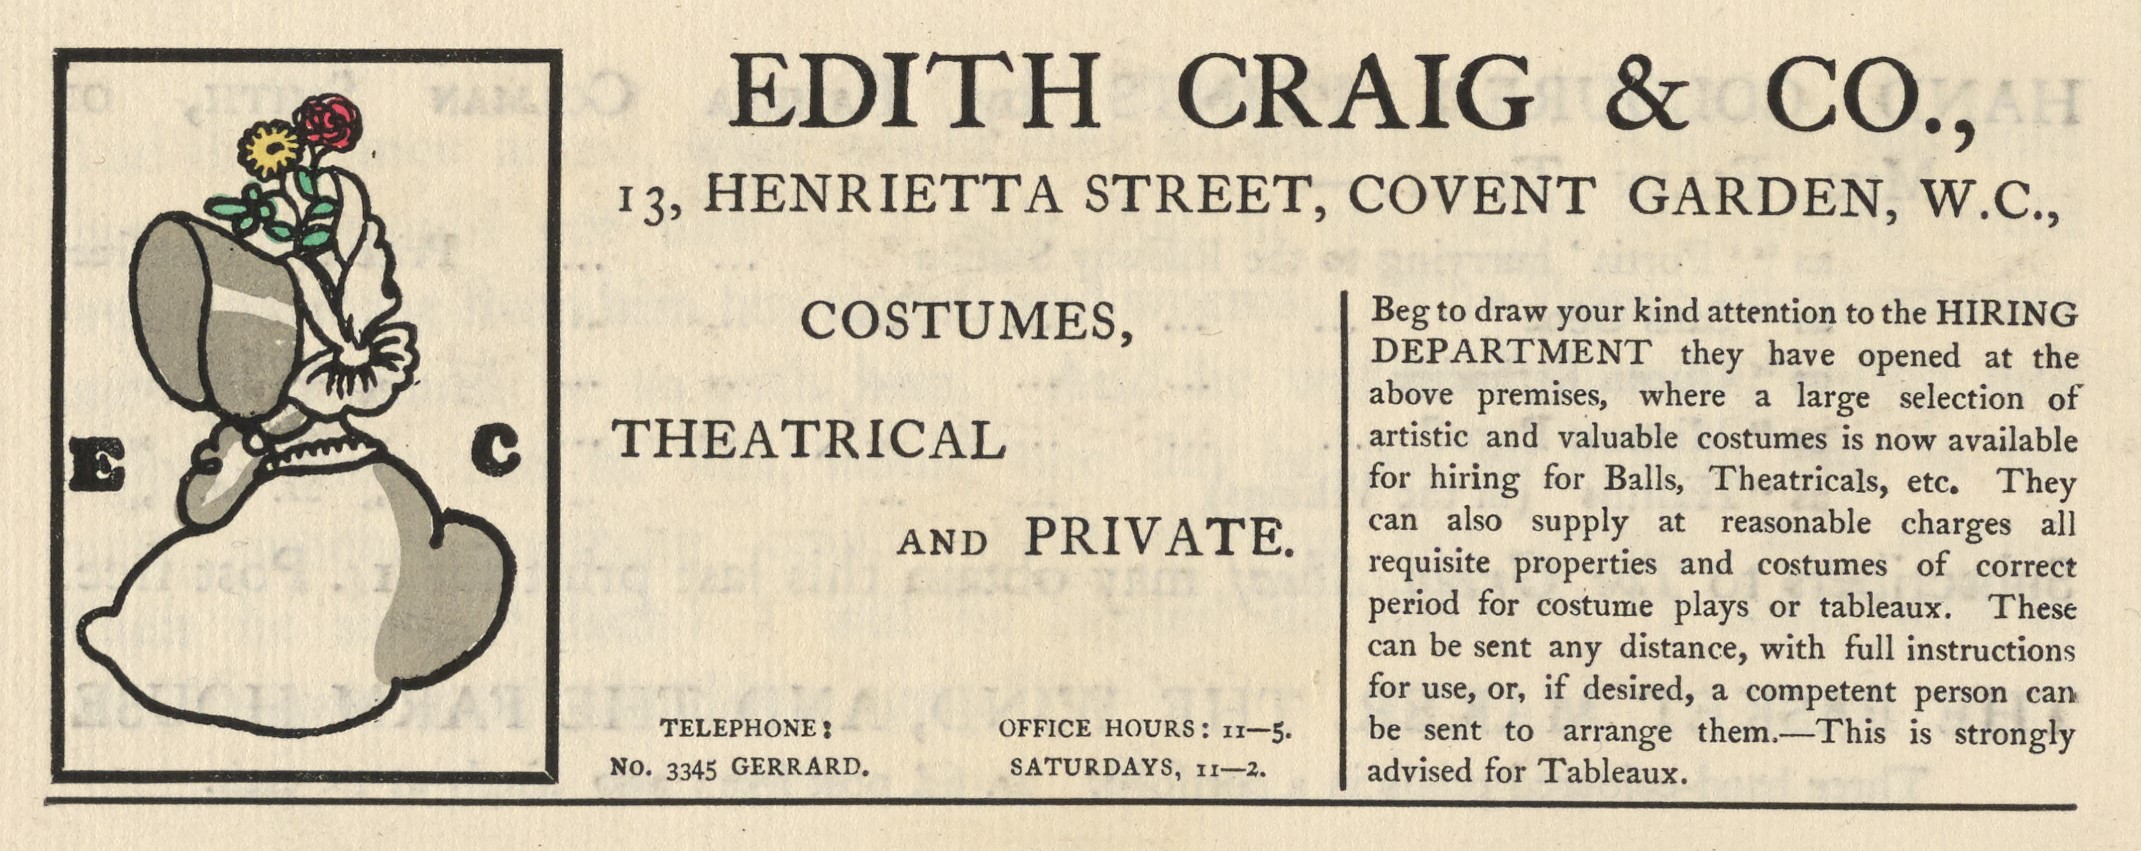 The illustrated advertisement occupies the top third of the page of advertisements.. The ad is titled “Edith Craig & Co.,” in a large serif font. Below the title, an address is printed: “13, Henrietta Street, Covent Garden, W.C.” To the left of the text is a small, coloured illustration with a black rectangular frame. It depicts a woman from the shoulders up, in profile, wearing a bonnet that hides her face. The bonnet is decorated with a pale yellow ribbon on the side and has two flowers with green leaves – a yellow daisy and a red rose – emerging from its top. The bonnet and the edge of her dress are coloured grey. The initials “E” and “C” are positioned to either side of the woman, in a heavy serif font. The text of the ad is divided into two columns beneath the title and address, and reads “Costumes, theatrical and private. Telephone: No. 3345 Gerrard. Office hours: 11-5. Saturdays, 11-2. Beg to draw your attention to the HIRING DEPARTMENT they have opened at the above premises, where a large selection of artistic and valuable costumes is now available for hiring for Balls, Theatricals, etc. They can also supply at reasonable charges all requisite properties and costumes of correct period for costume plays or tableaux. These can be sent any distance, with full instructions for use, or, if desired, a competent person can be sent to arrange them.—This is strongly advised for Tableaux.”